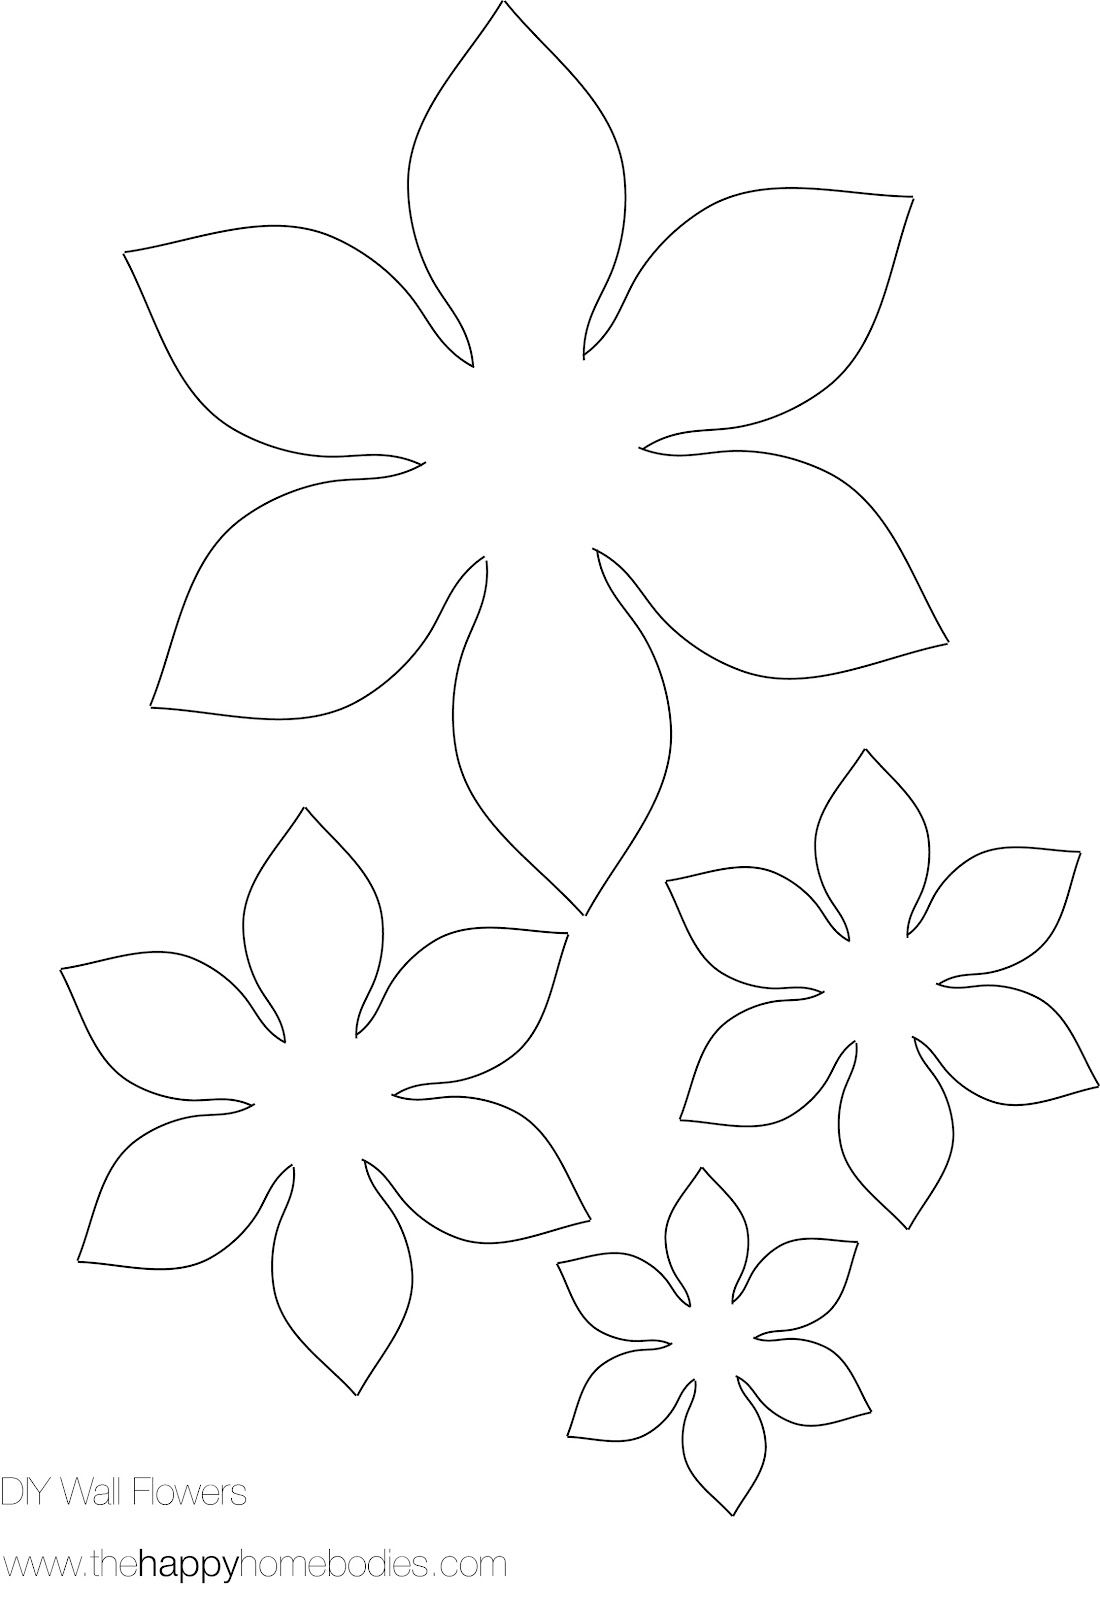 PAW Patrol coloring pages - Free 35+ Printable Flower Designs To Color